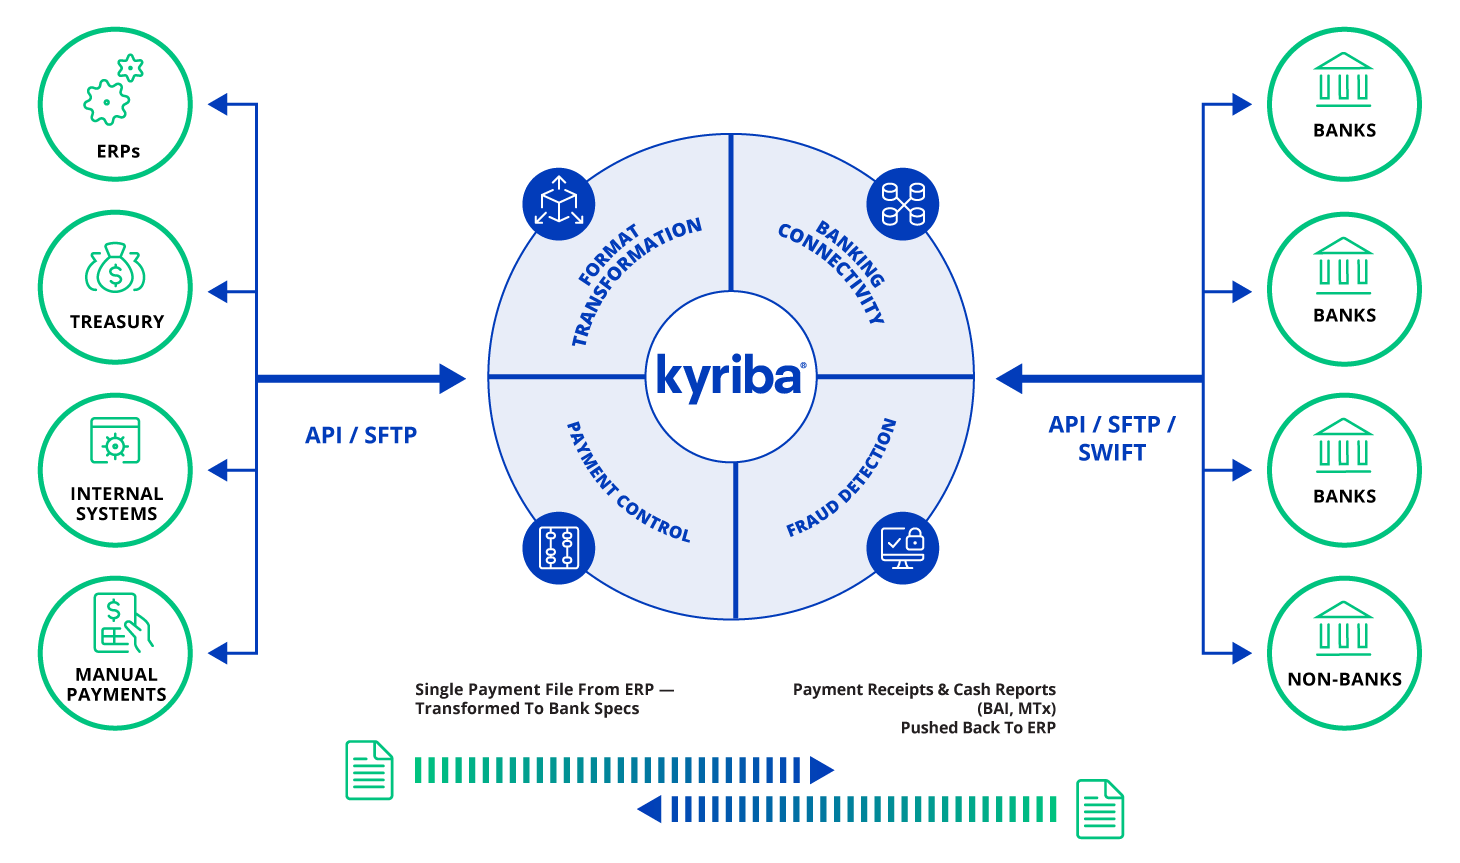 Payment hub by Kyriba, a diagram showing a robust workflow and connectivity management platform to centralize and optimize payments